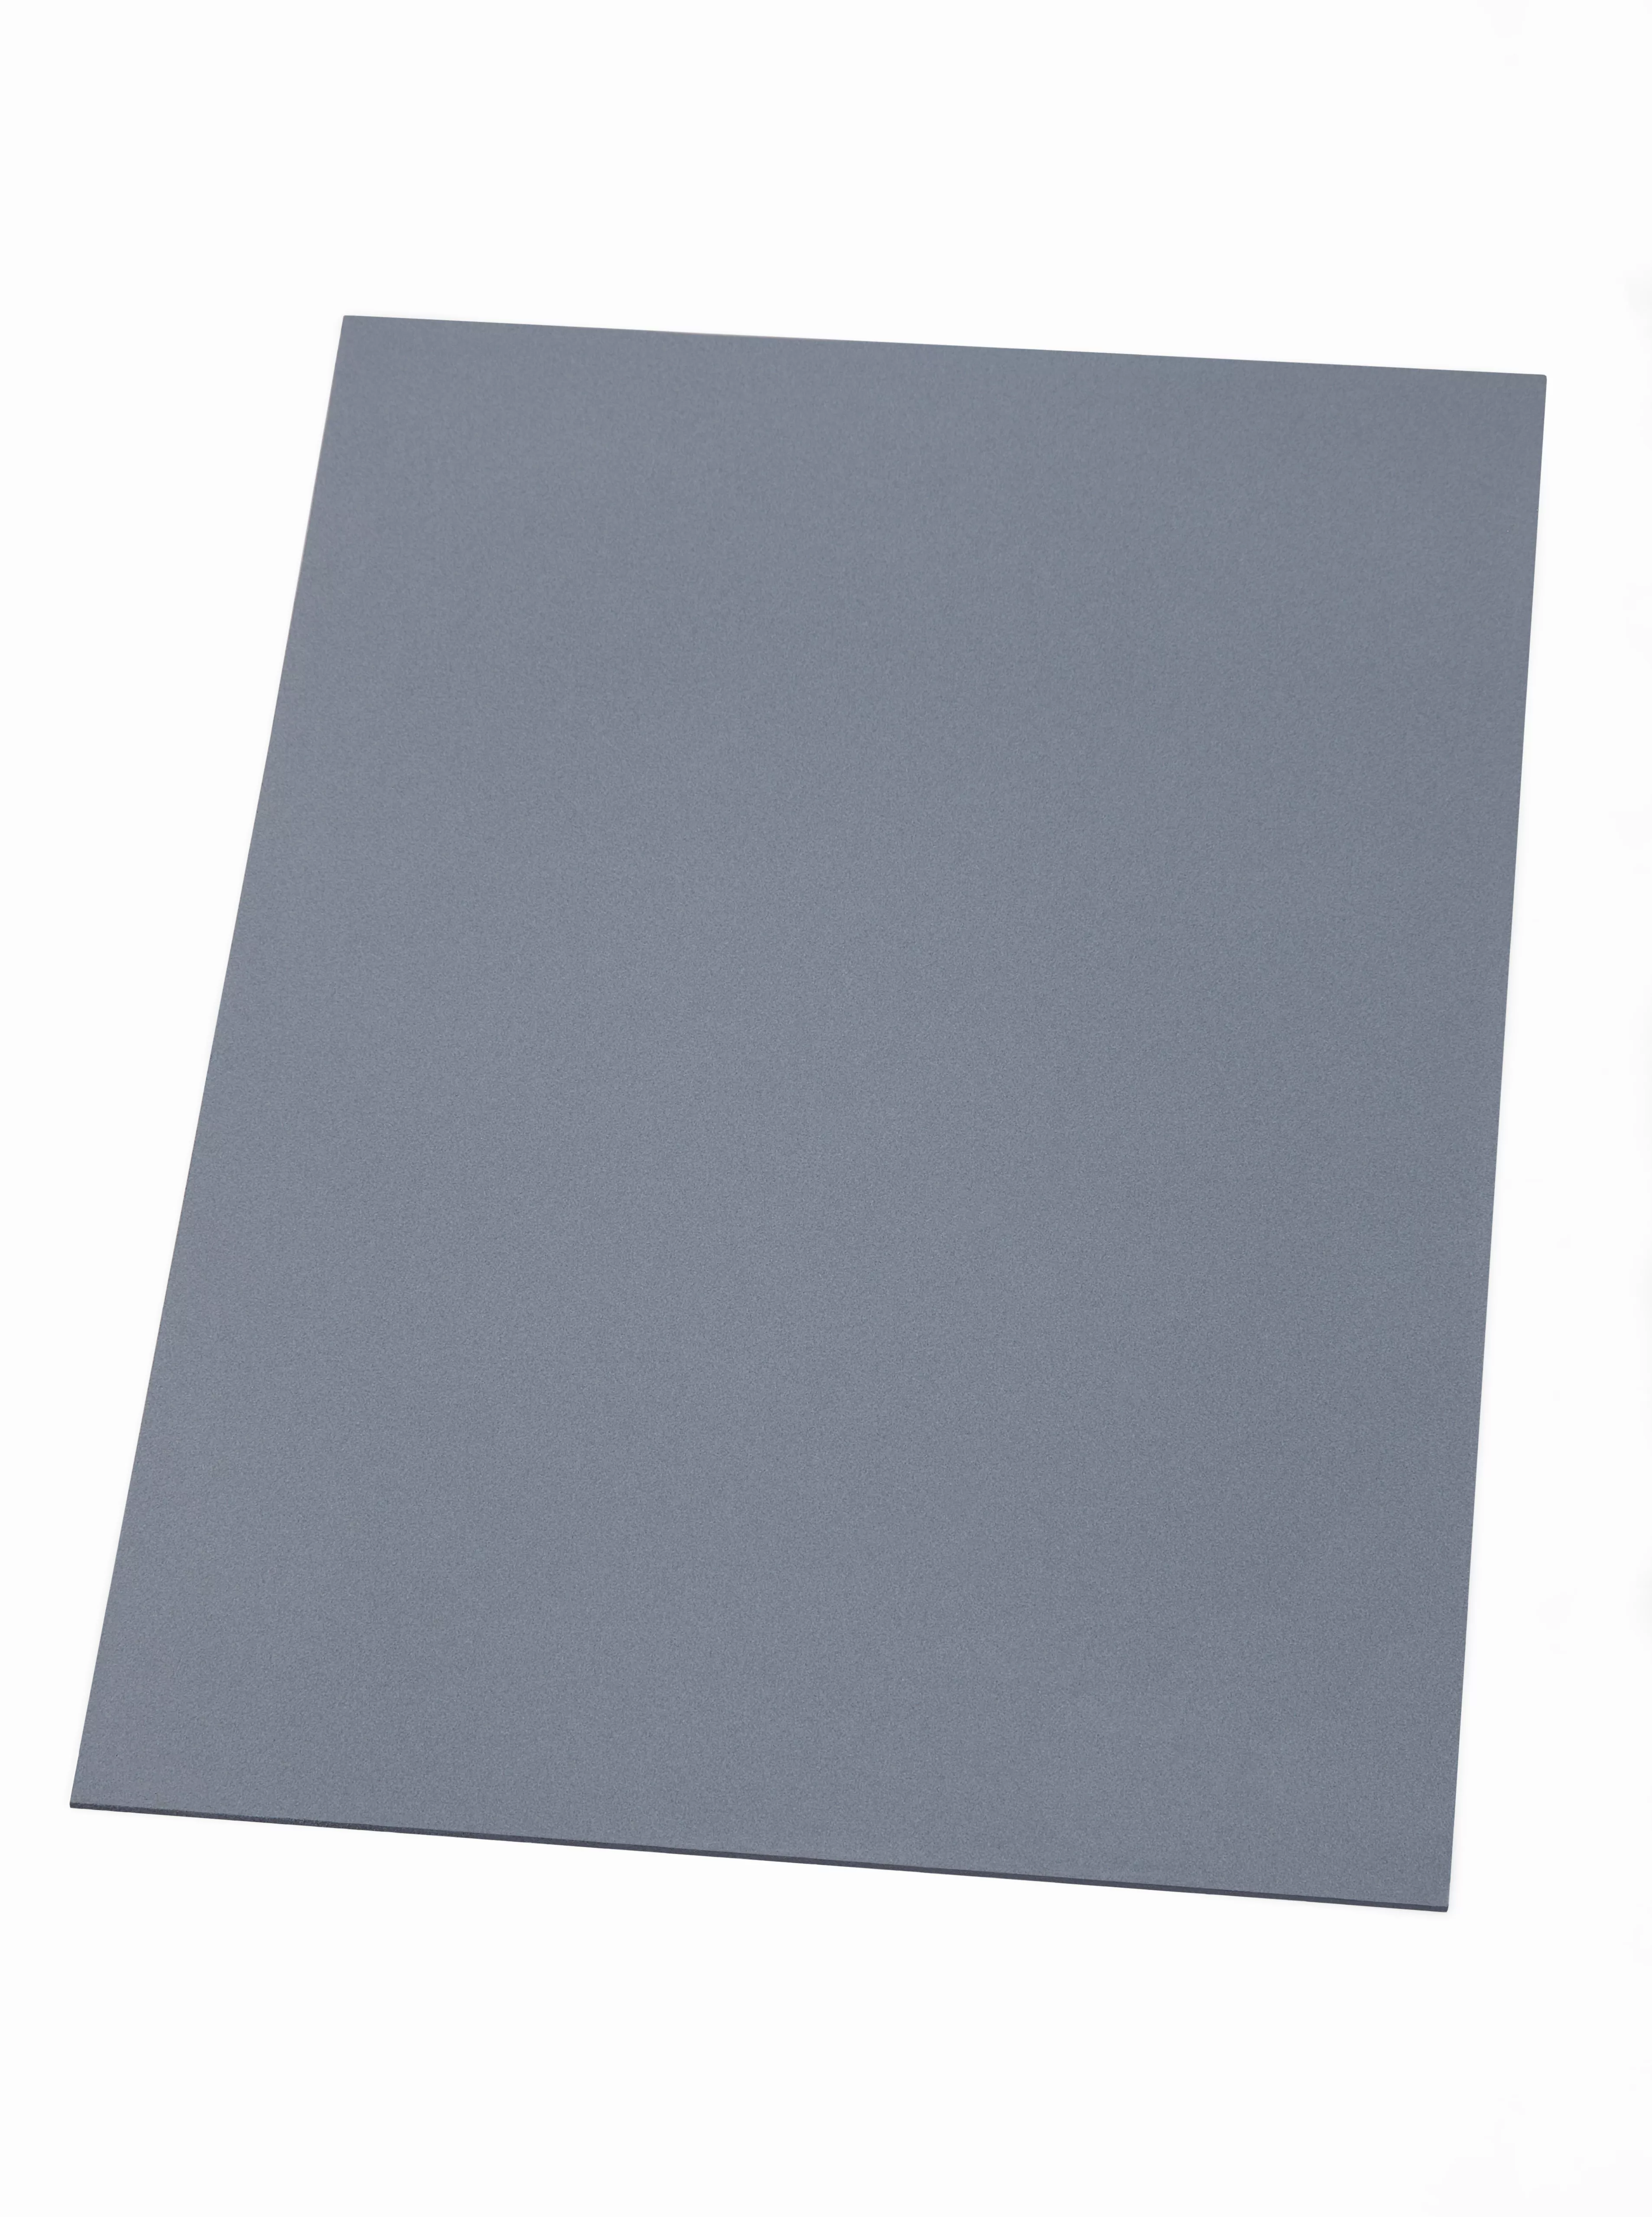 3M™ Thermally Conductive Interface Pad Sheet 5519, 210 mm x 155 mm x 1.0
mm, 40/Case